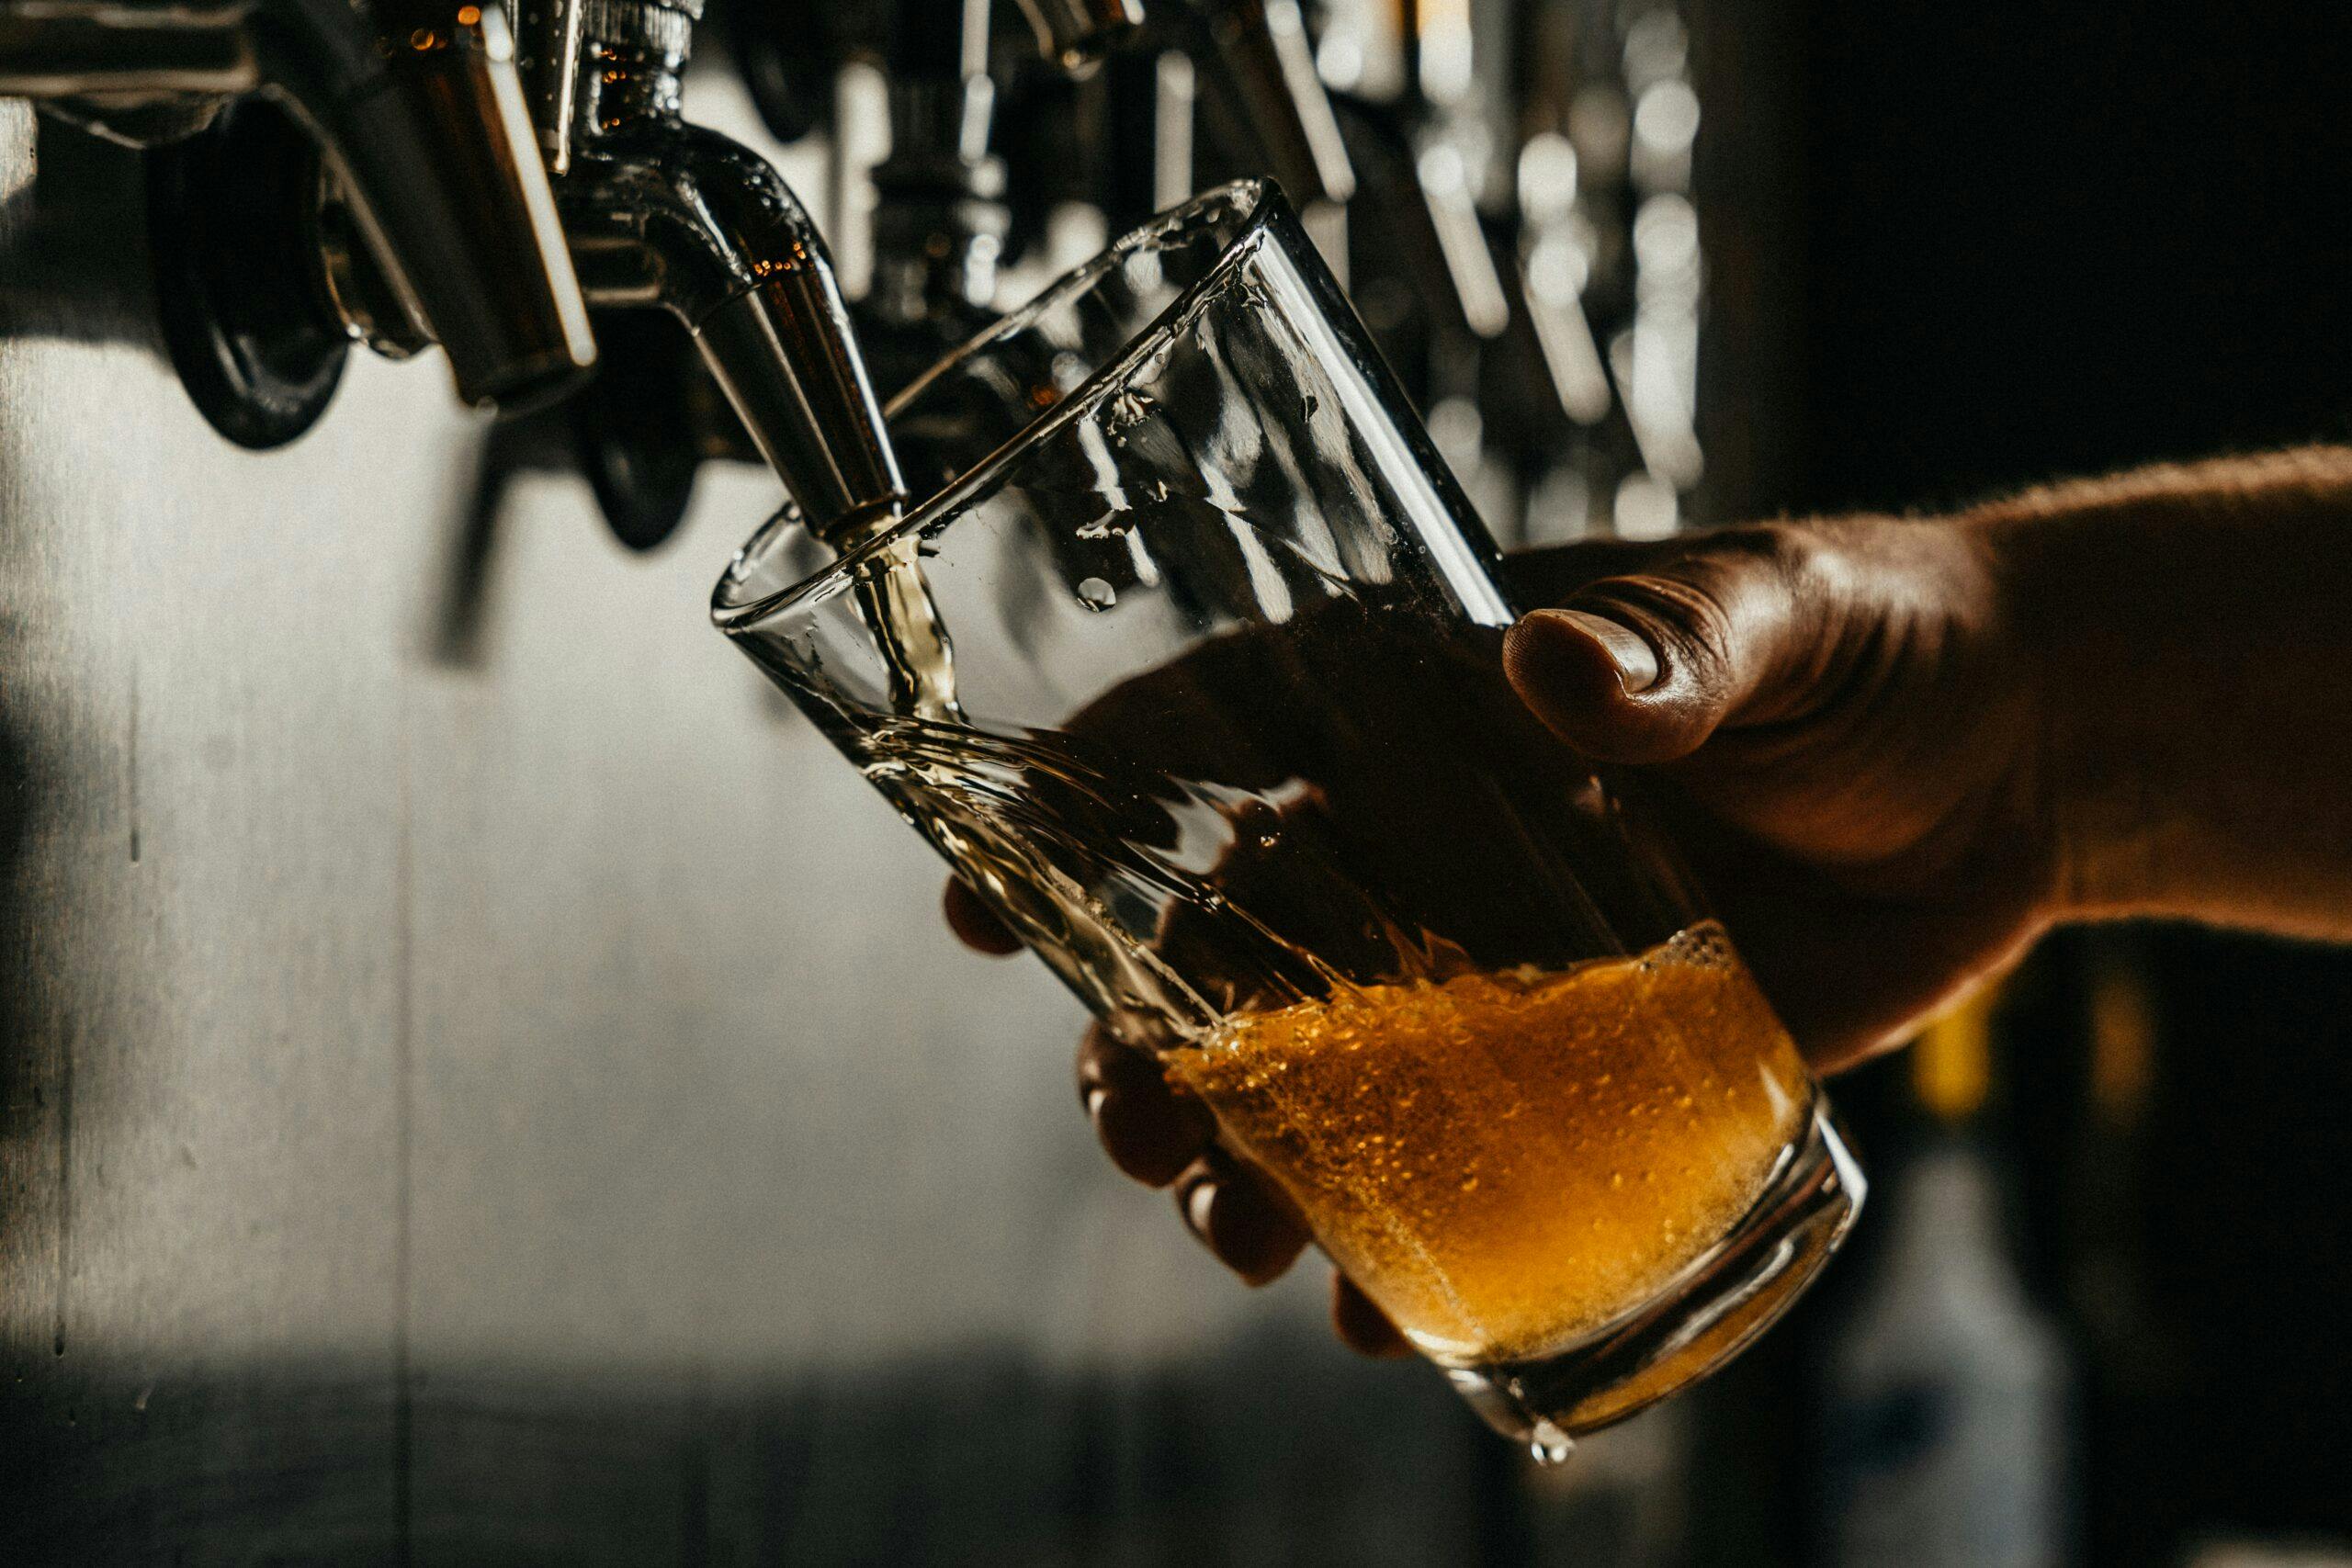 pouring a beer from the tap handles